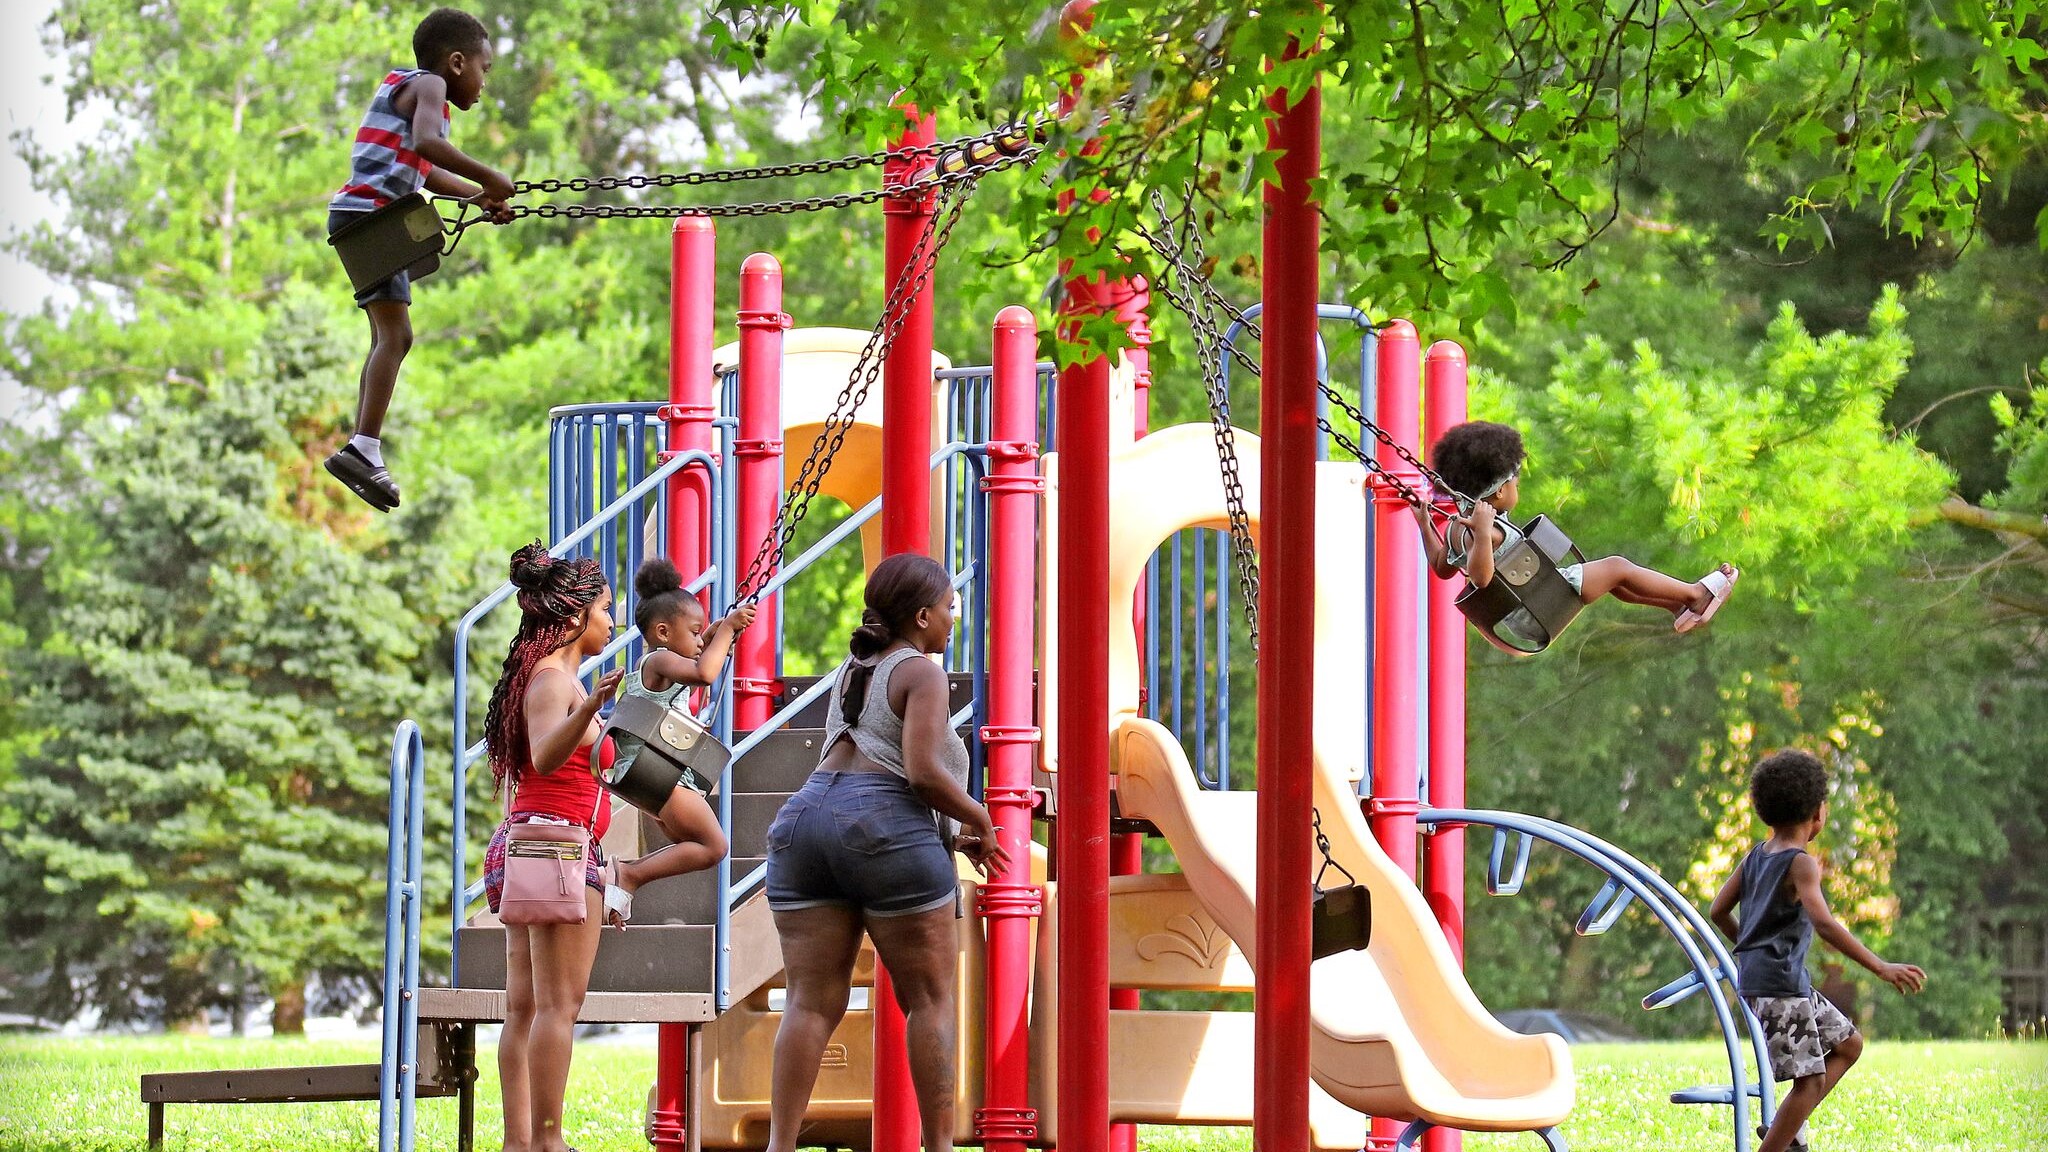 Kids on the Swings and Slides playing at Holmes park